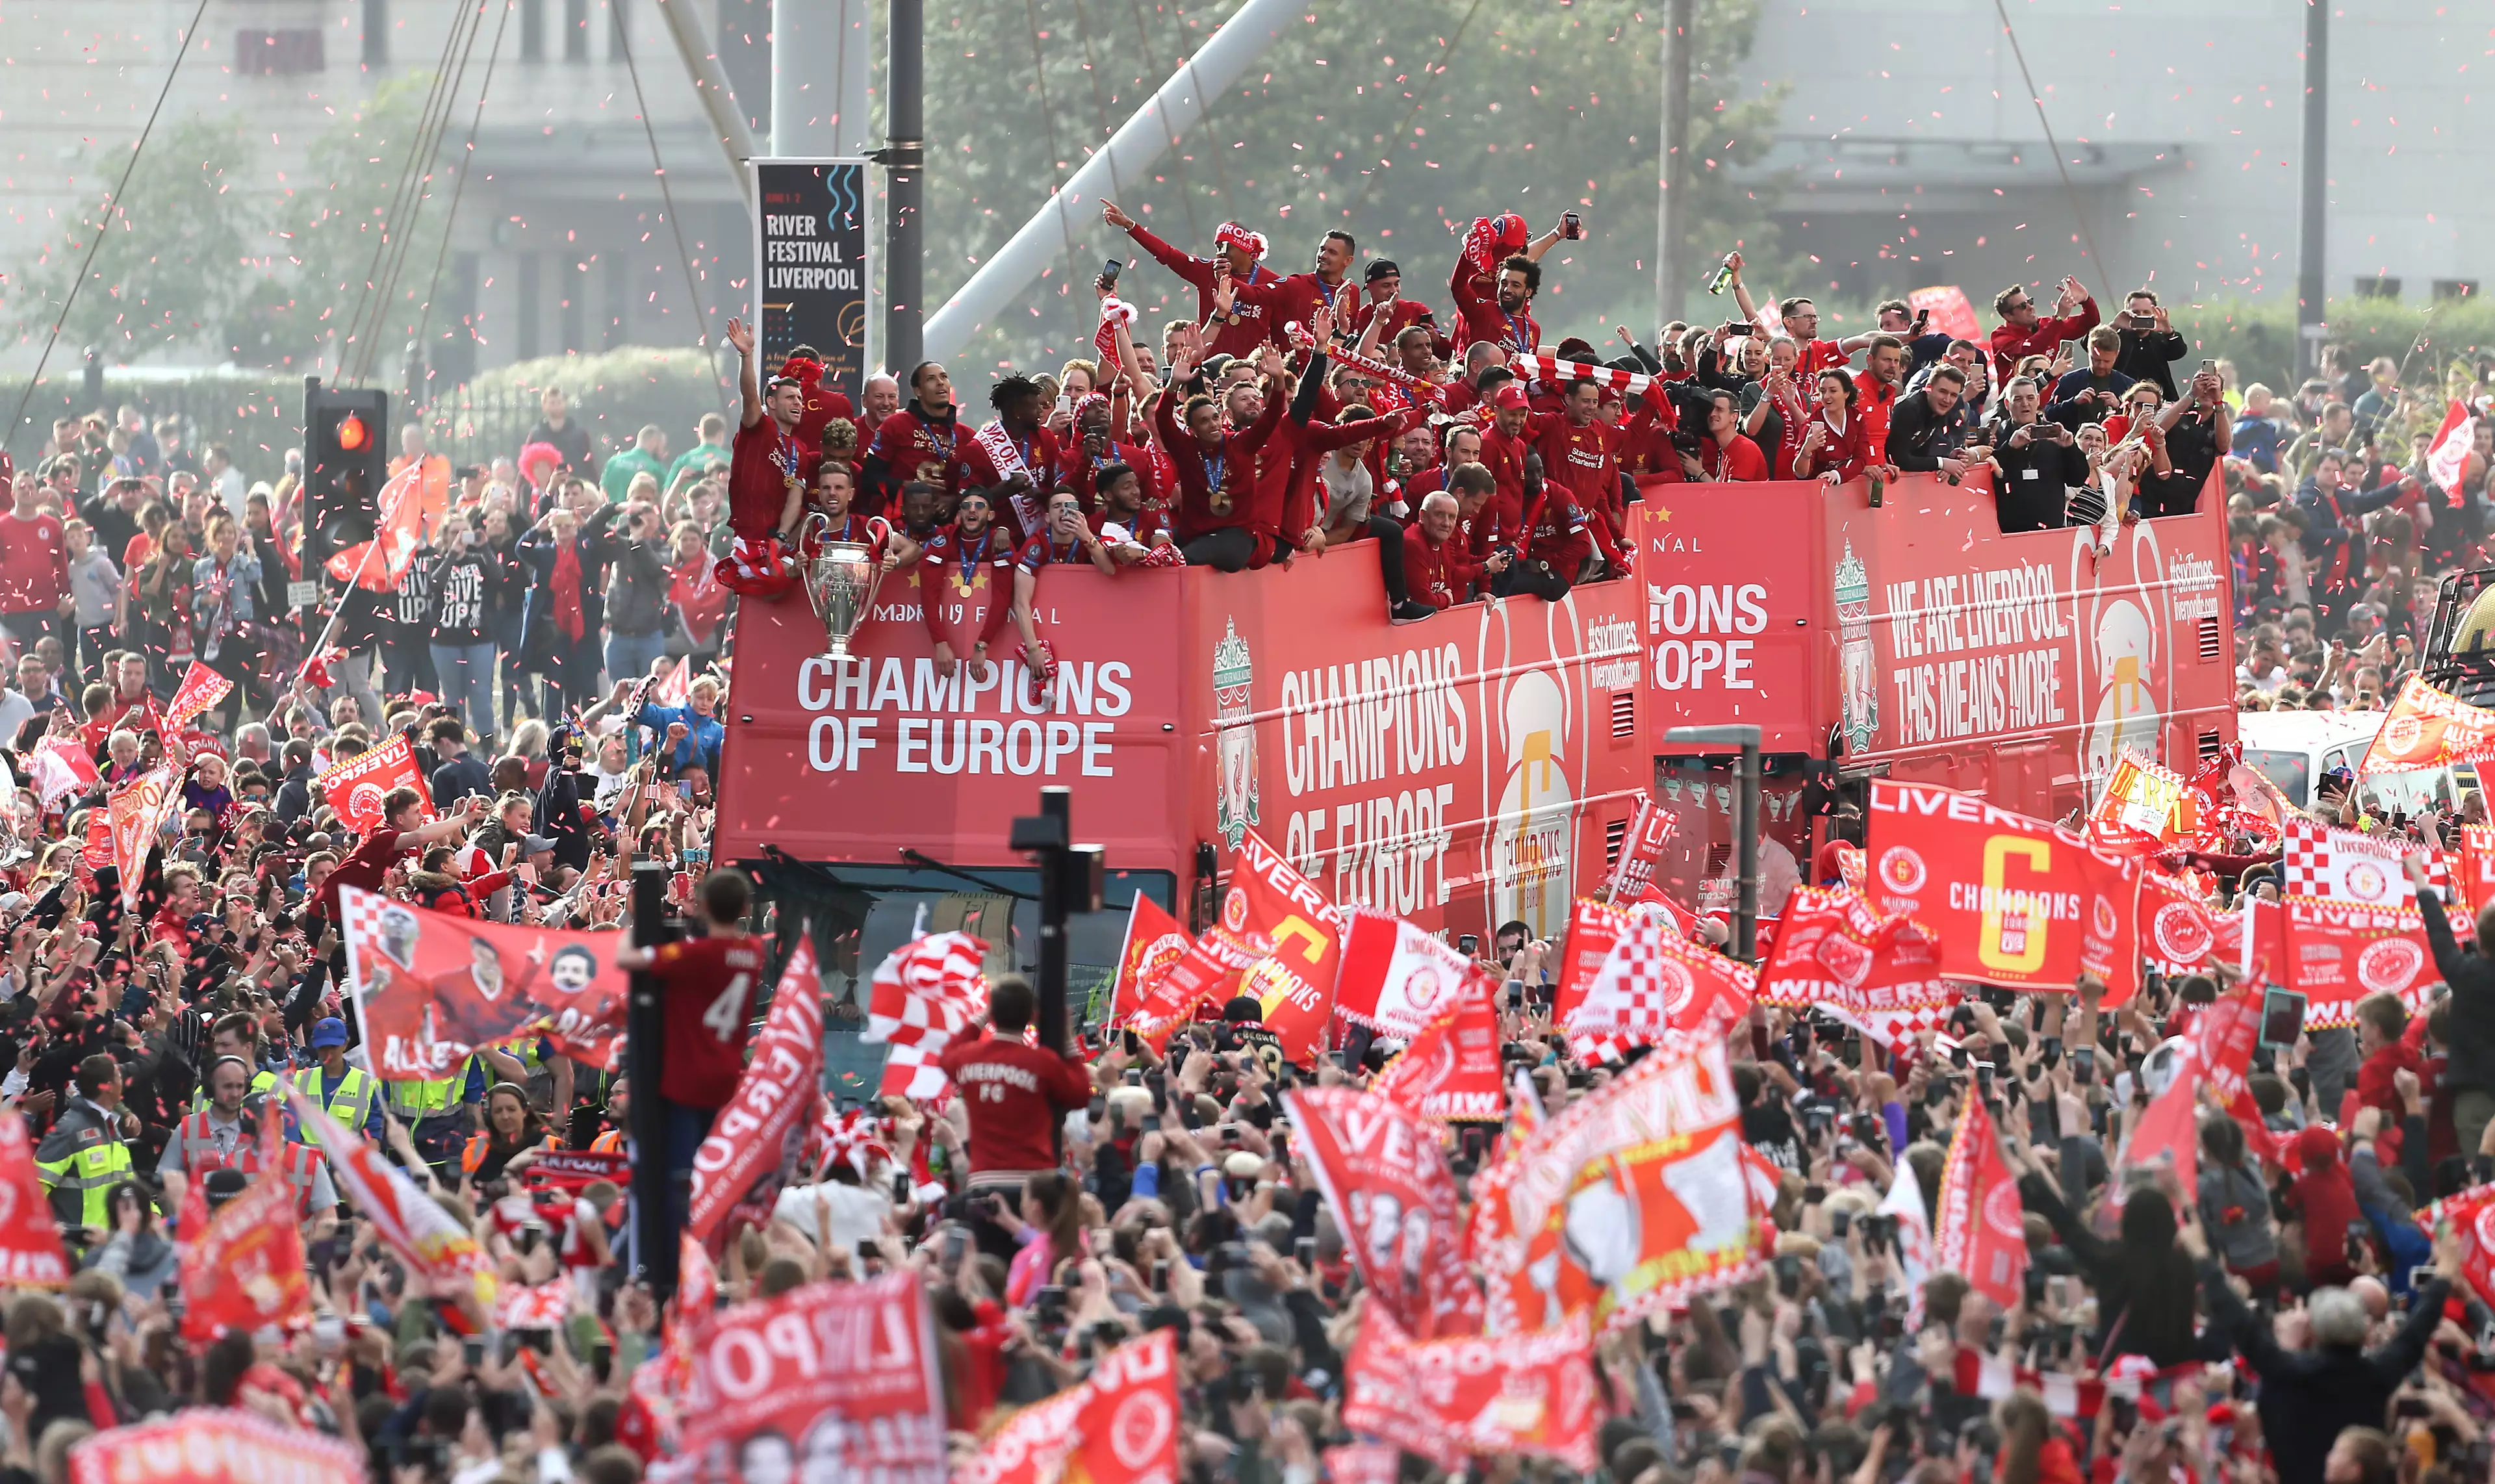 Liverpool fans packed the streets of the city to celebrate the team's Champions League victory